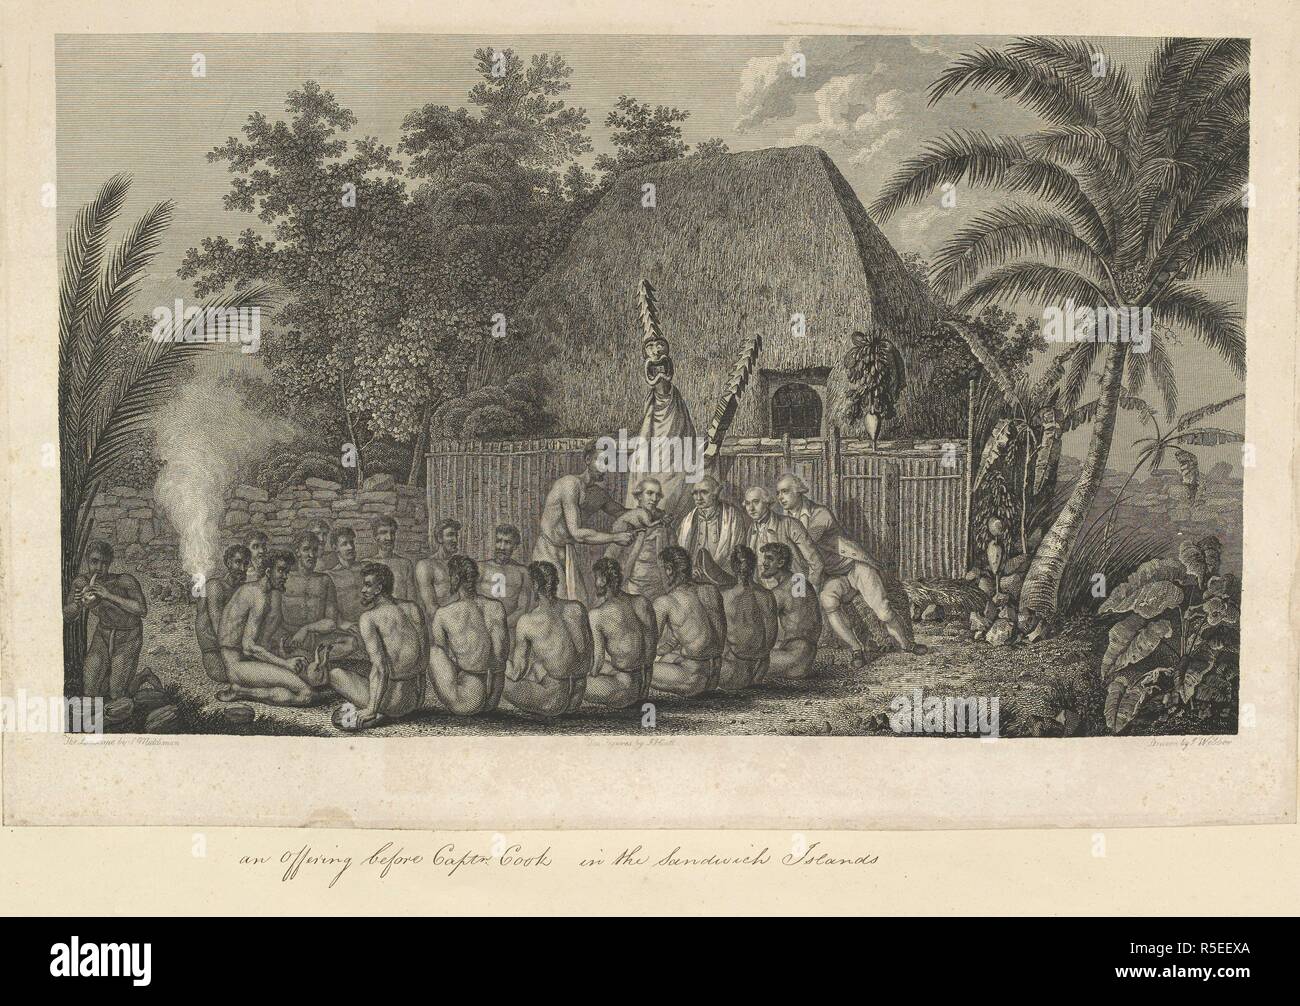 An offering before Captain Cook in the Sandwich Islands. Drawn by John Webber; the landscape engraving by Samuel Middiman; the figures by John Hall. A scene in Hawaii in 1778. Hawaiian men are seated on the ground around four European men, and are offering suckling pigs. Behind the Europeans stands a figure in a tall mask, and in the background is a fenced enclosure containing a steep-roofed thatched building. There are palms and other native vegetation at left and right. A collection of drawings by A. Buchan, S. Parkinson, and J. F. Miller, made in the Countries visited by Captain James Cook  Stock Photo